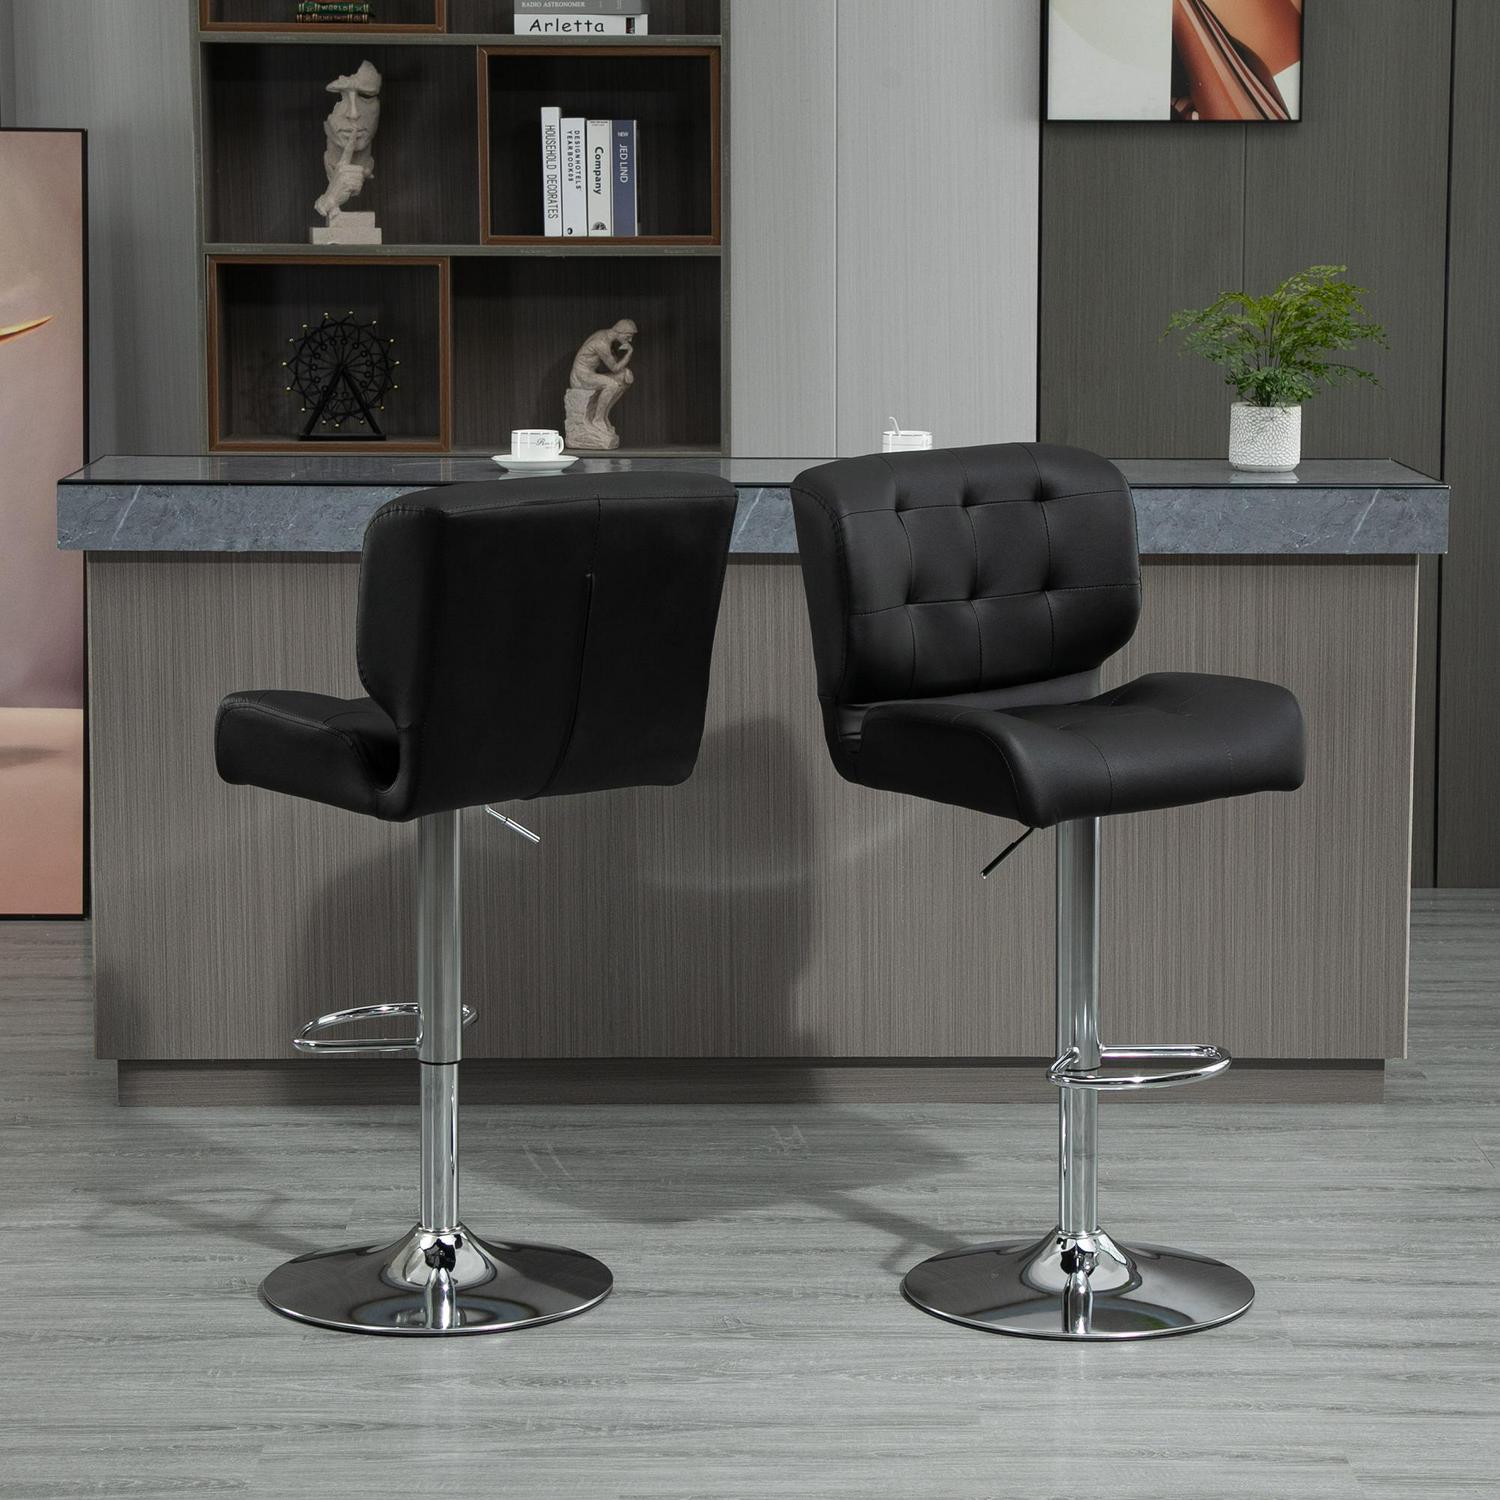 Set Of 2 PU Leather Racing-Style Bar Stools Chairs - Black